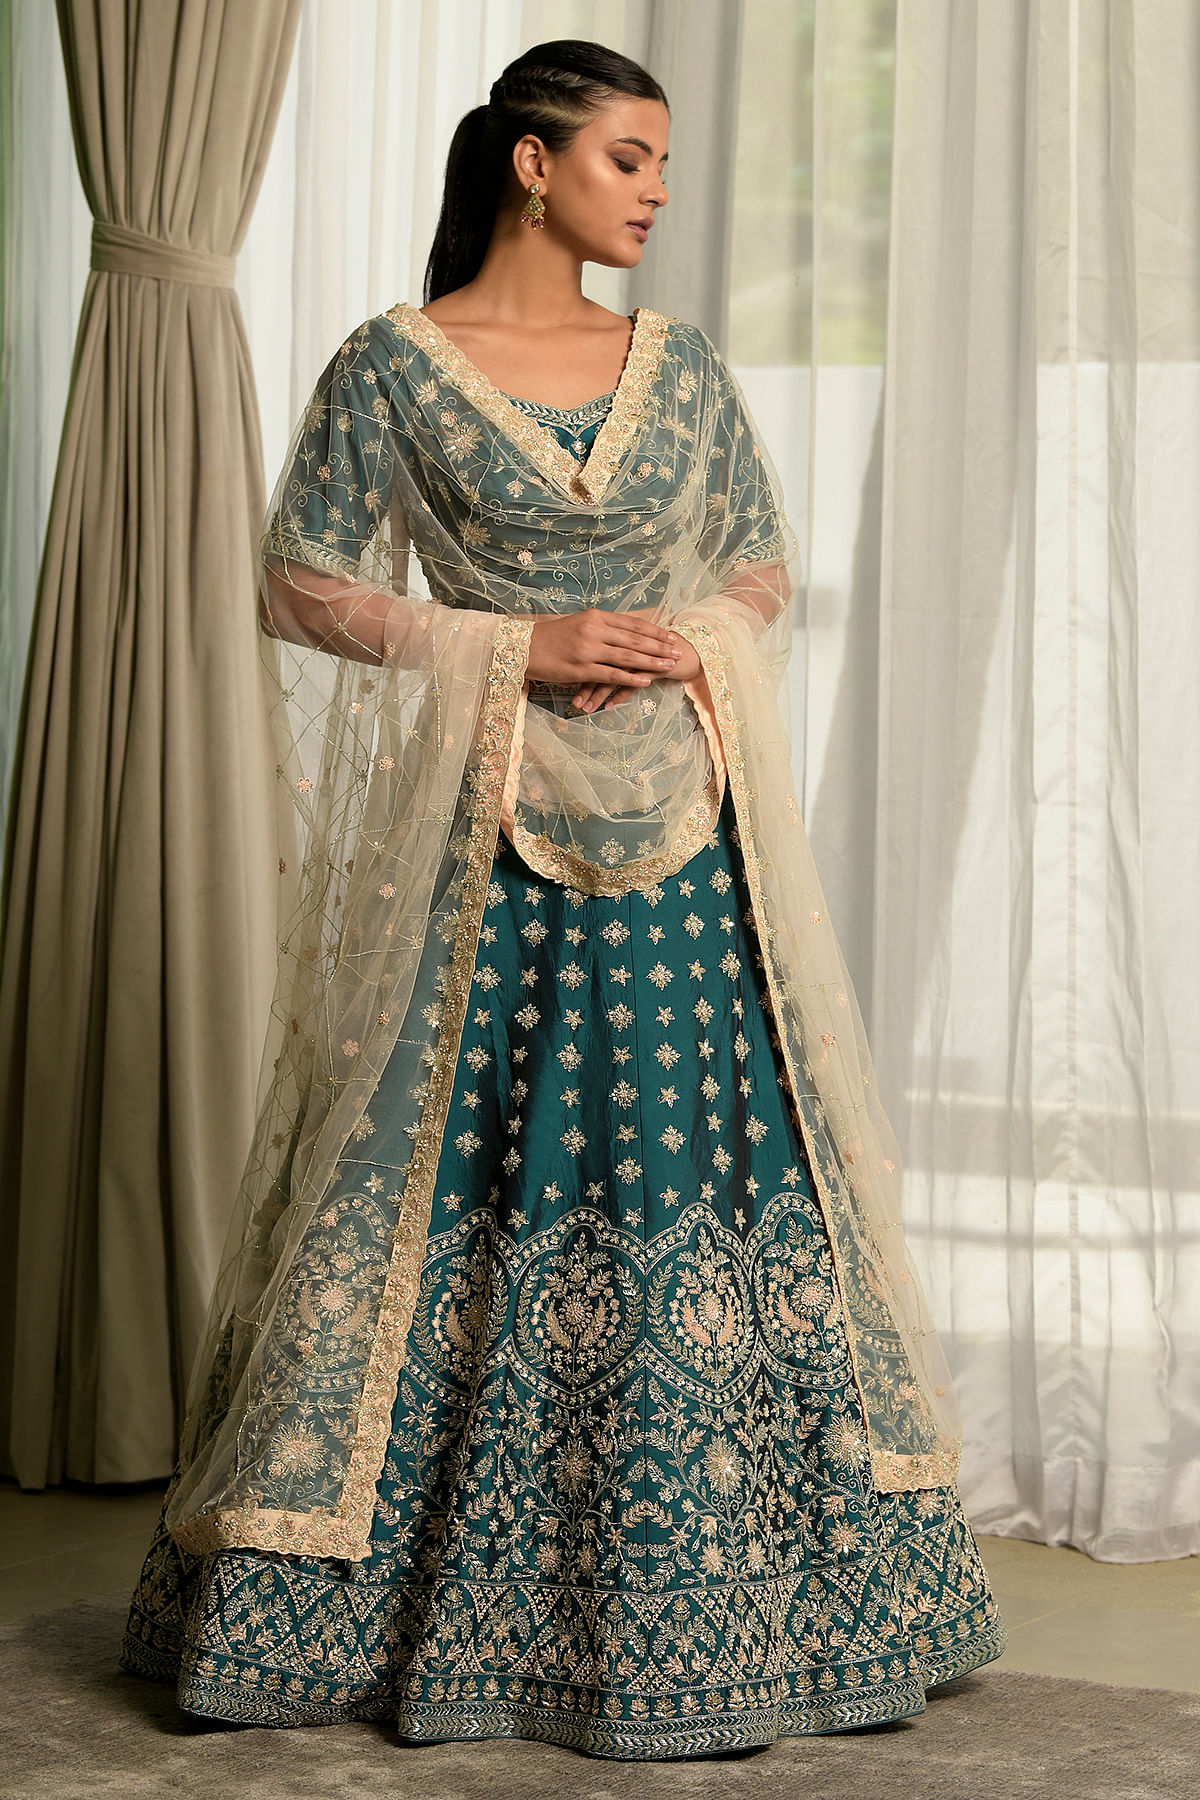 G3+ Fashions - Peacock Blue Shade Wedding Lehenga Choli In Georgette  Product Code: G3-WLC11032 Click to shop online:- https://bit.ly/3RAUhPy |  Facebook